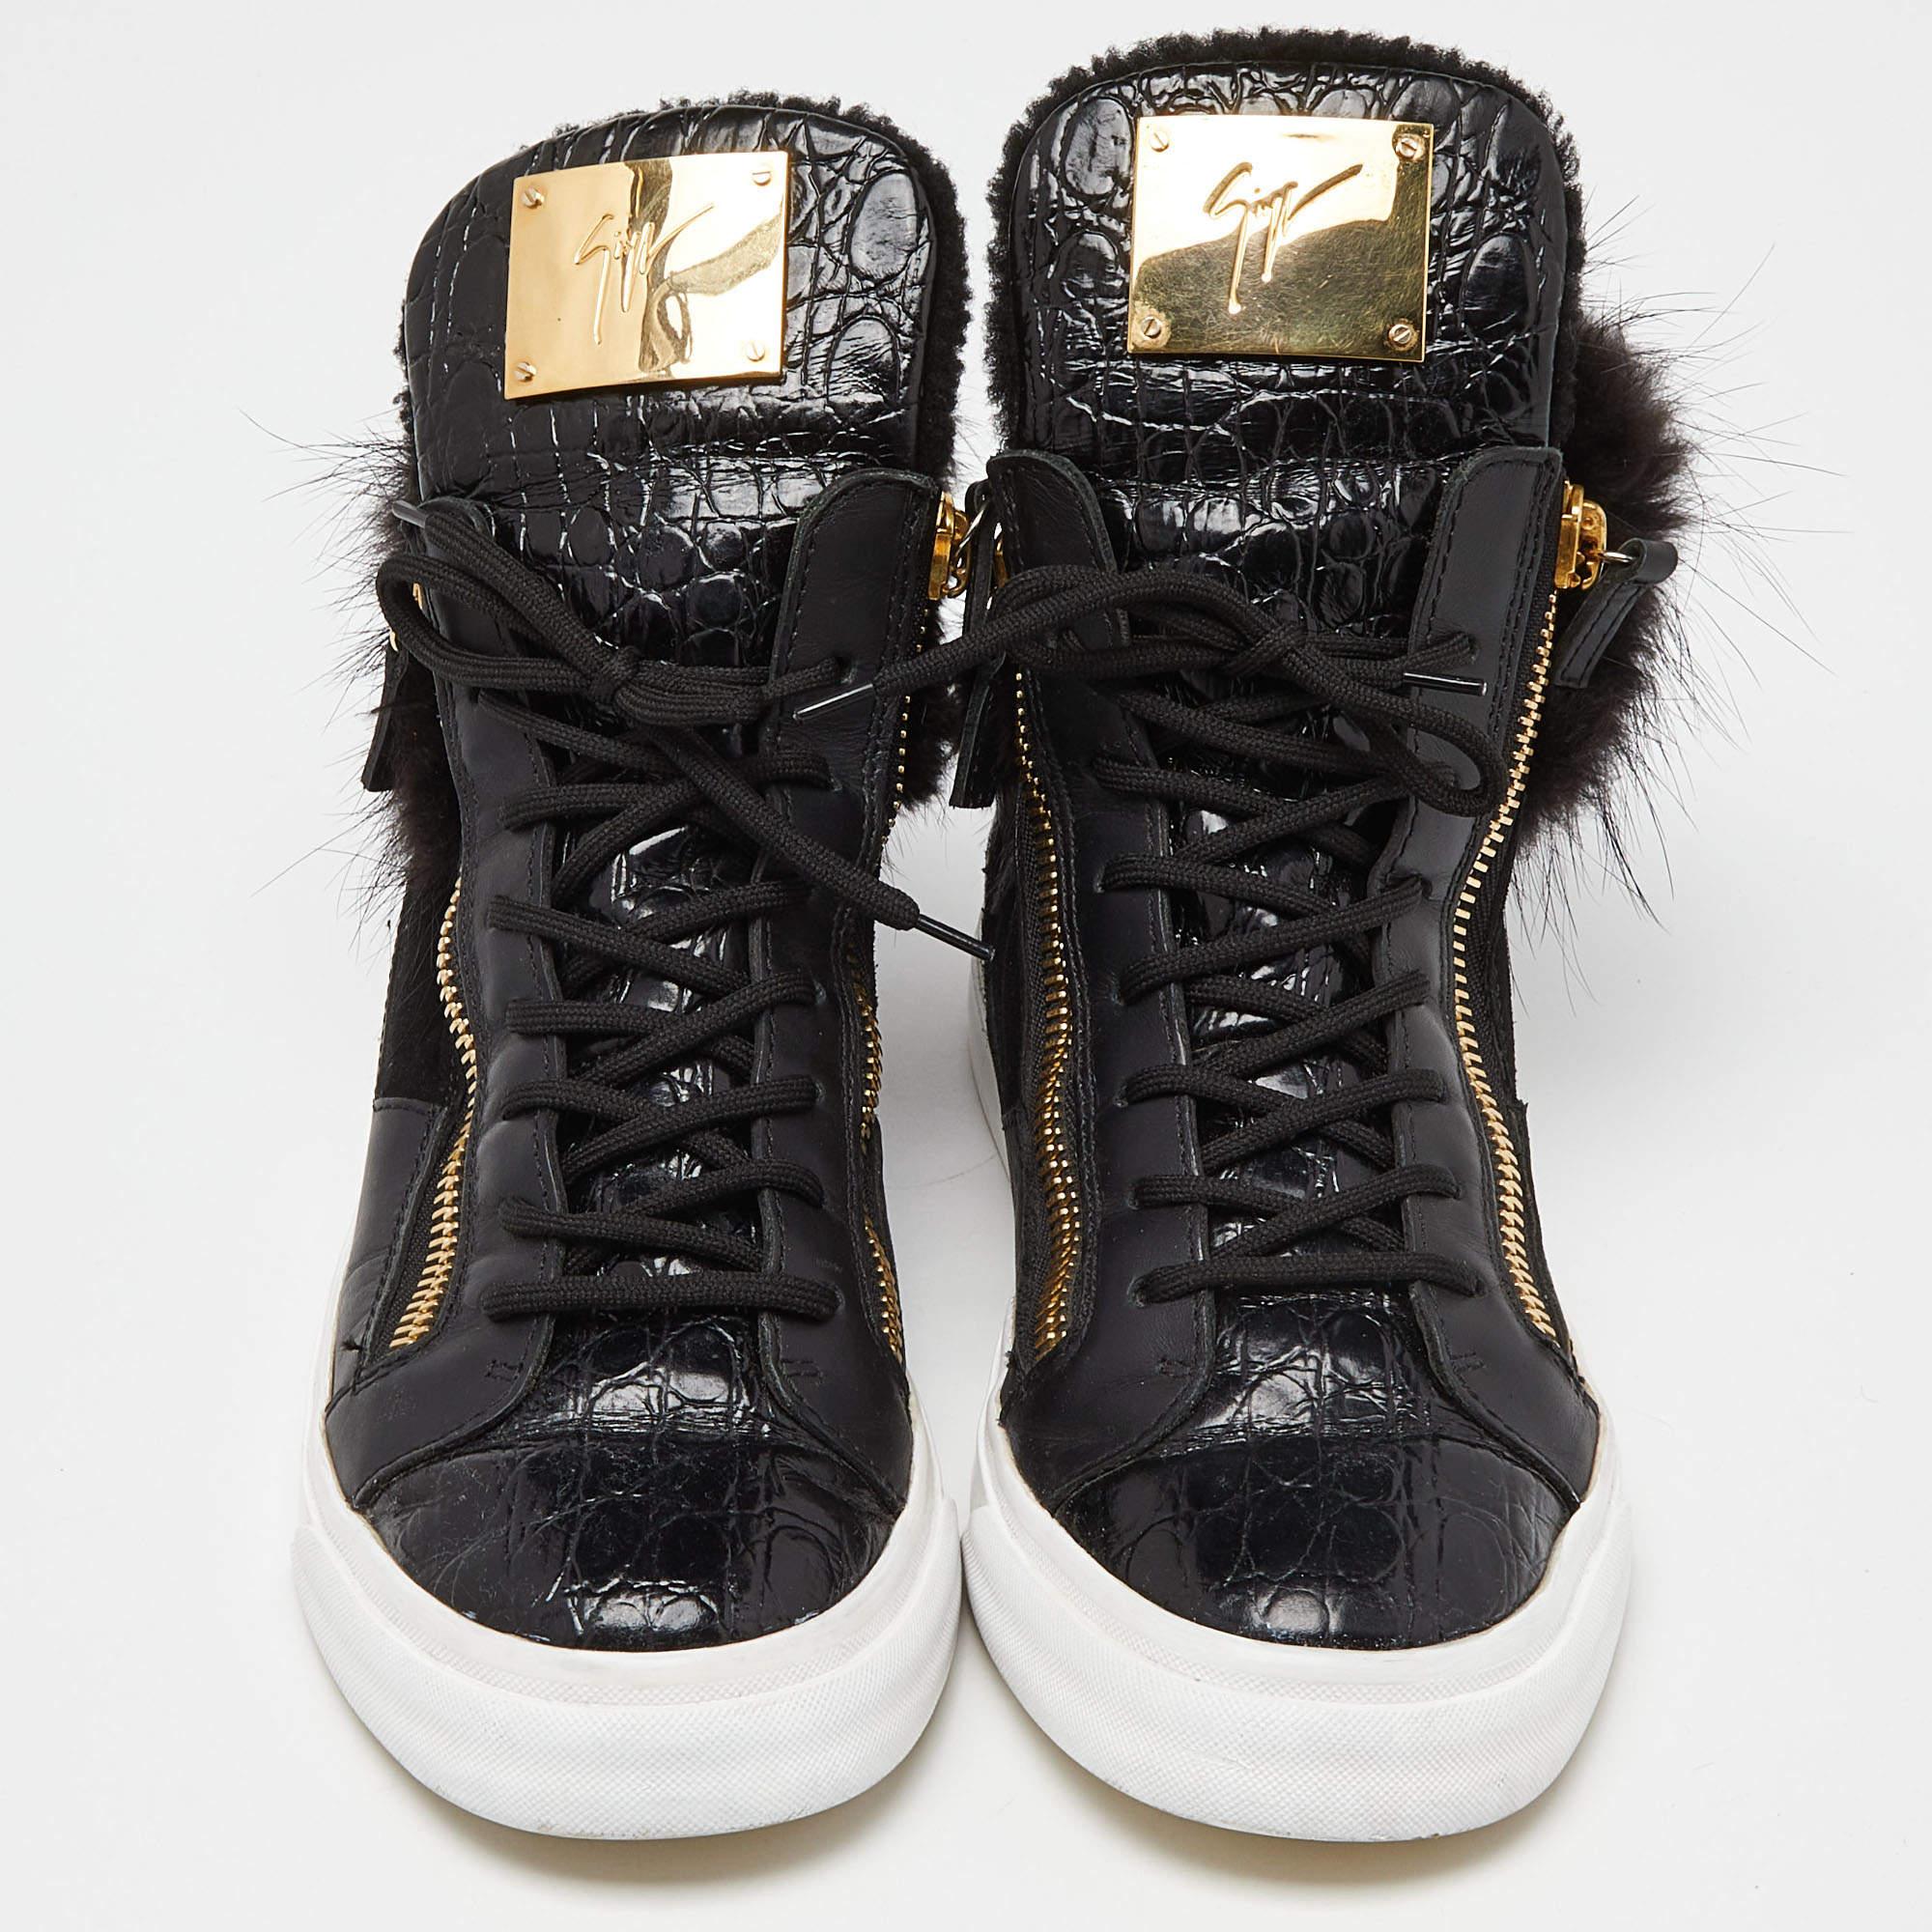 Giuseppe Zanotti Black Leather Suede and Calfhair London High-Top Sneakers Size  In Good Condition For Sale In Dubai, Al Qouz 2